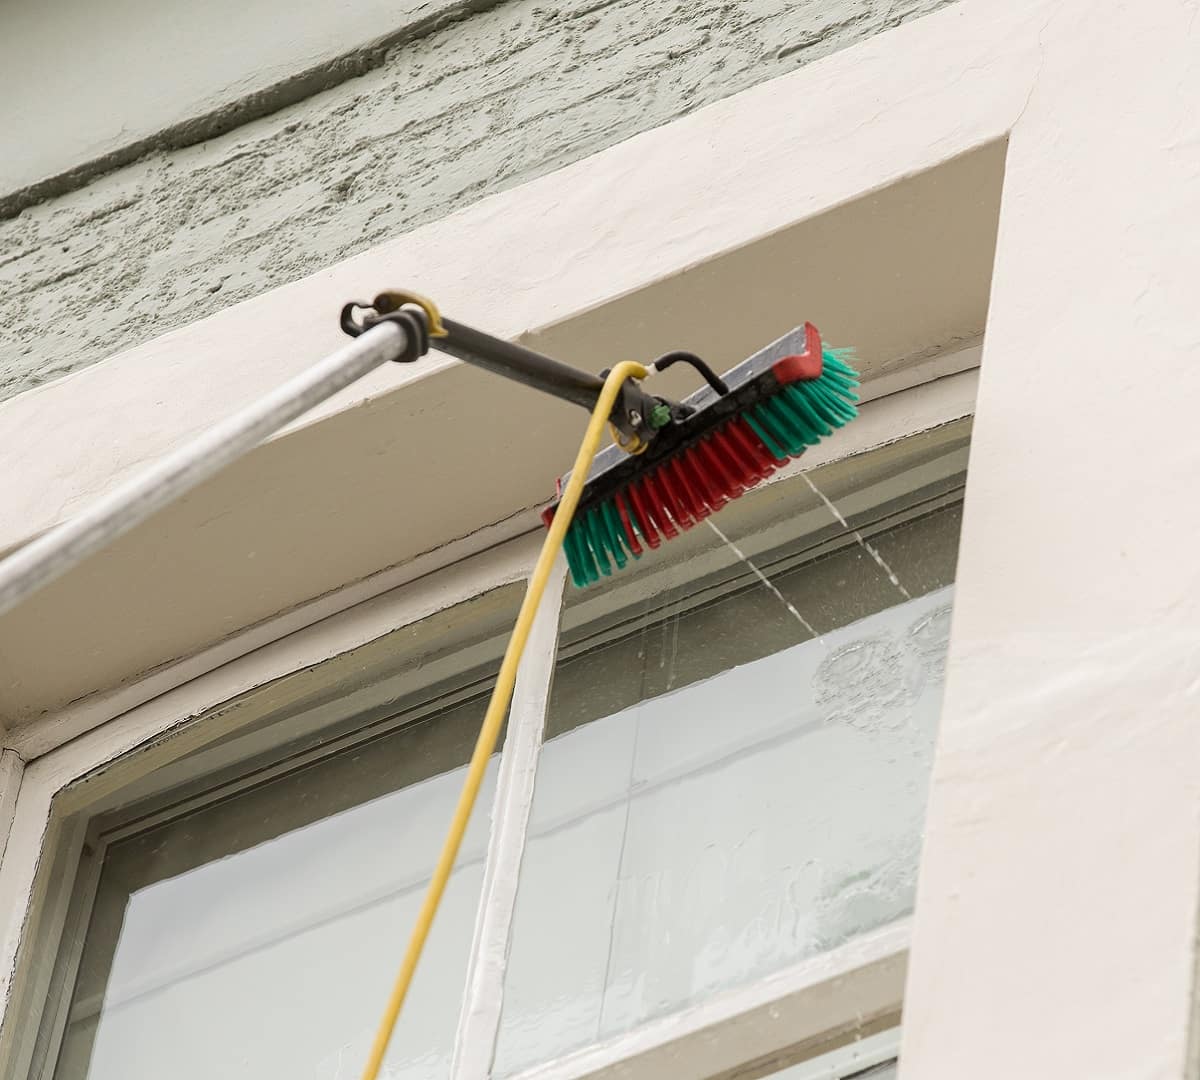 Cleaning second floor window with a special window cleaning machine